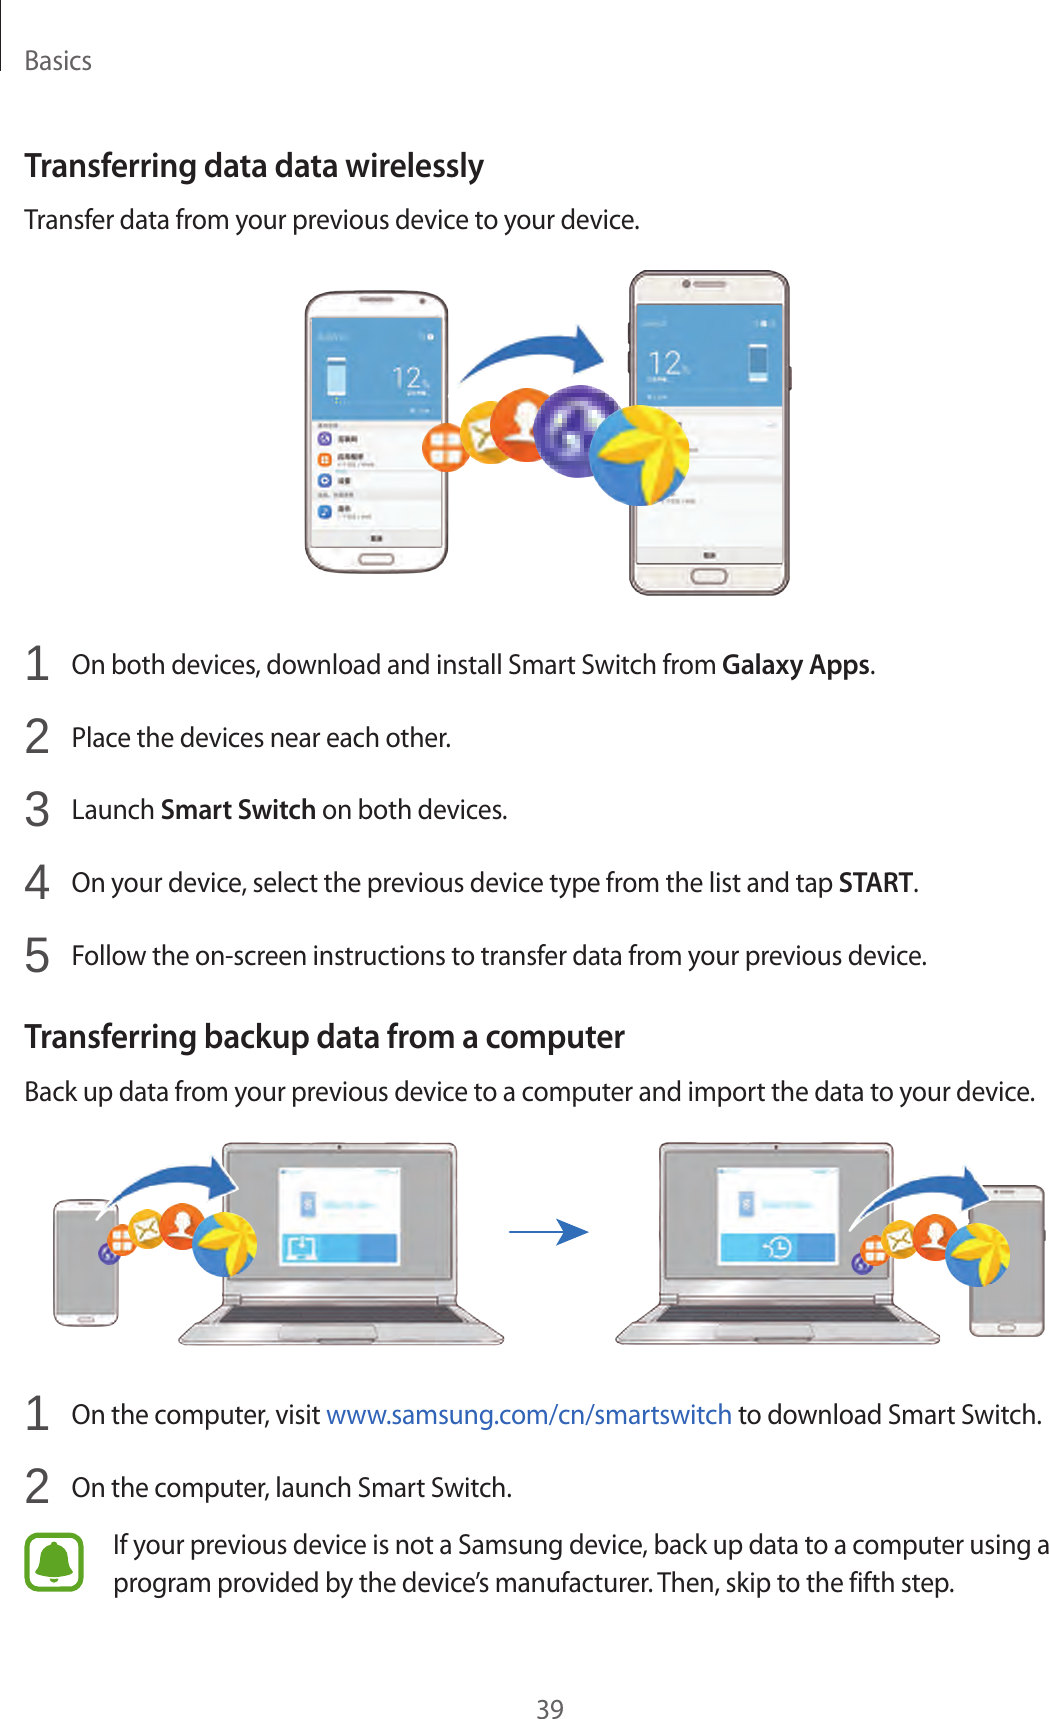 Basics39Transferring data data wirelesslyTransfer data from your previous device to your device.1  On both devices, download and install Smart Switch from Galaxy Apps.2  Place the devices near each other.3  Launch Smart Switch on both devices.4  On your device, select the previous device type from the list and tap START.5  Follow the on-screen instructions to transfer data from your previous device.Transferring backup data from a computerBack up data from your previous device to a computer and import the data to your device.1  On the computer, visit www.samsung.com/cn/smartswitch to download Smart Switch.2  On the computer, launch Smart Switch.If your previous device is not a Samsung device, back up data to a computer using a program provided by the device’s manufacturer. Then, skip to the fifth step.